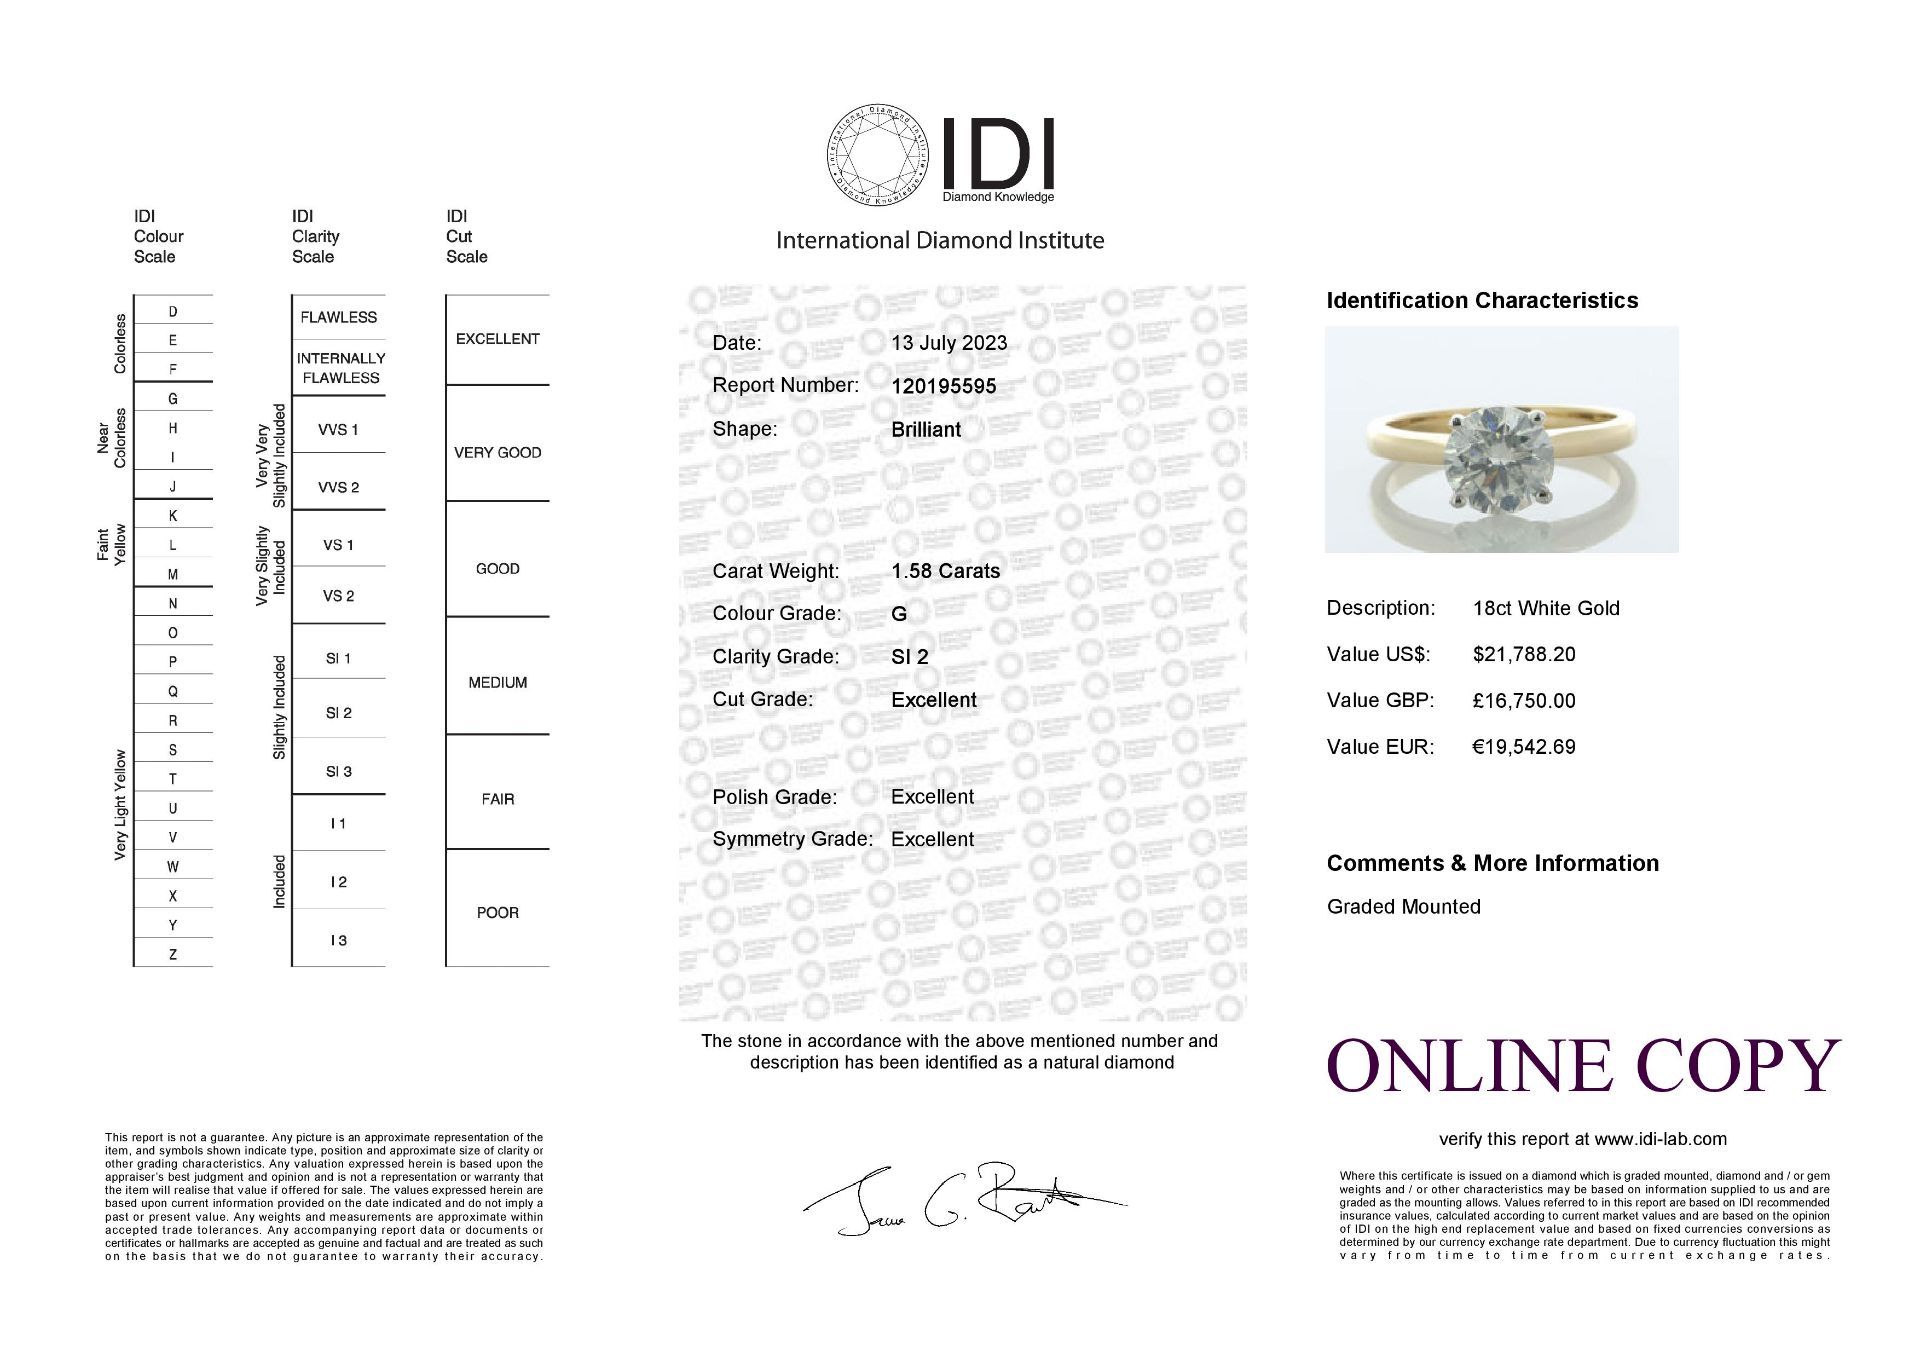 18ct Yellow Gold Single Stone Prong Set Diamond Ring 1.58 Carats - Valued By IDI £16,750.00 - A 1.58 - Image 5 of 5